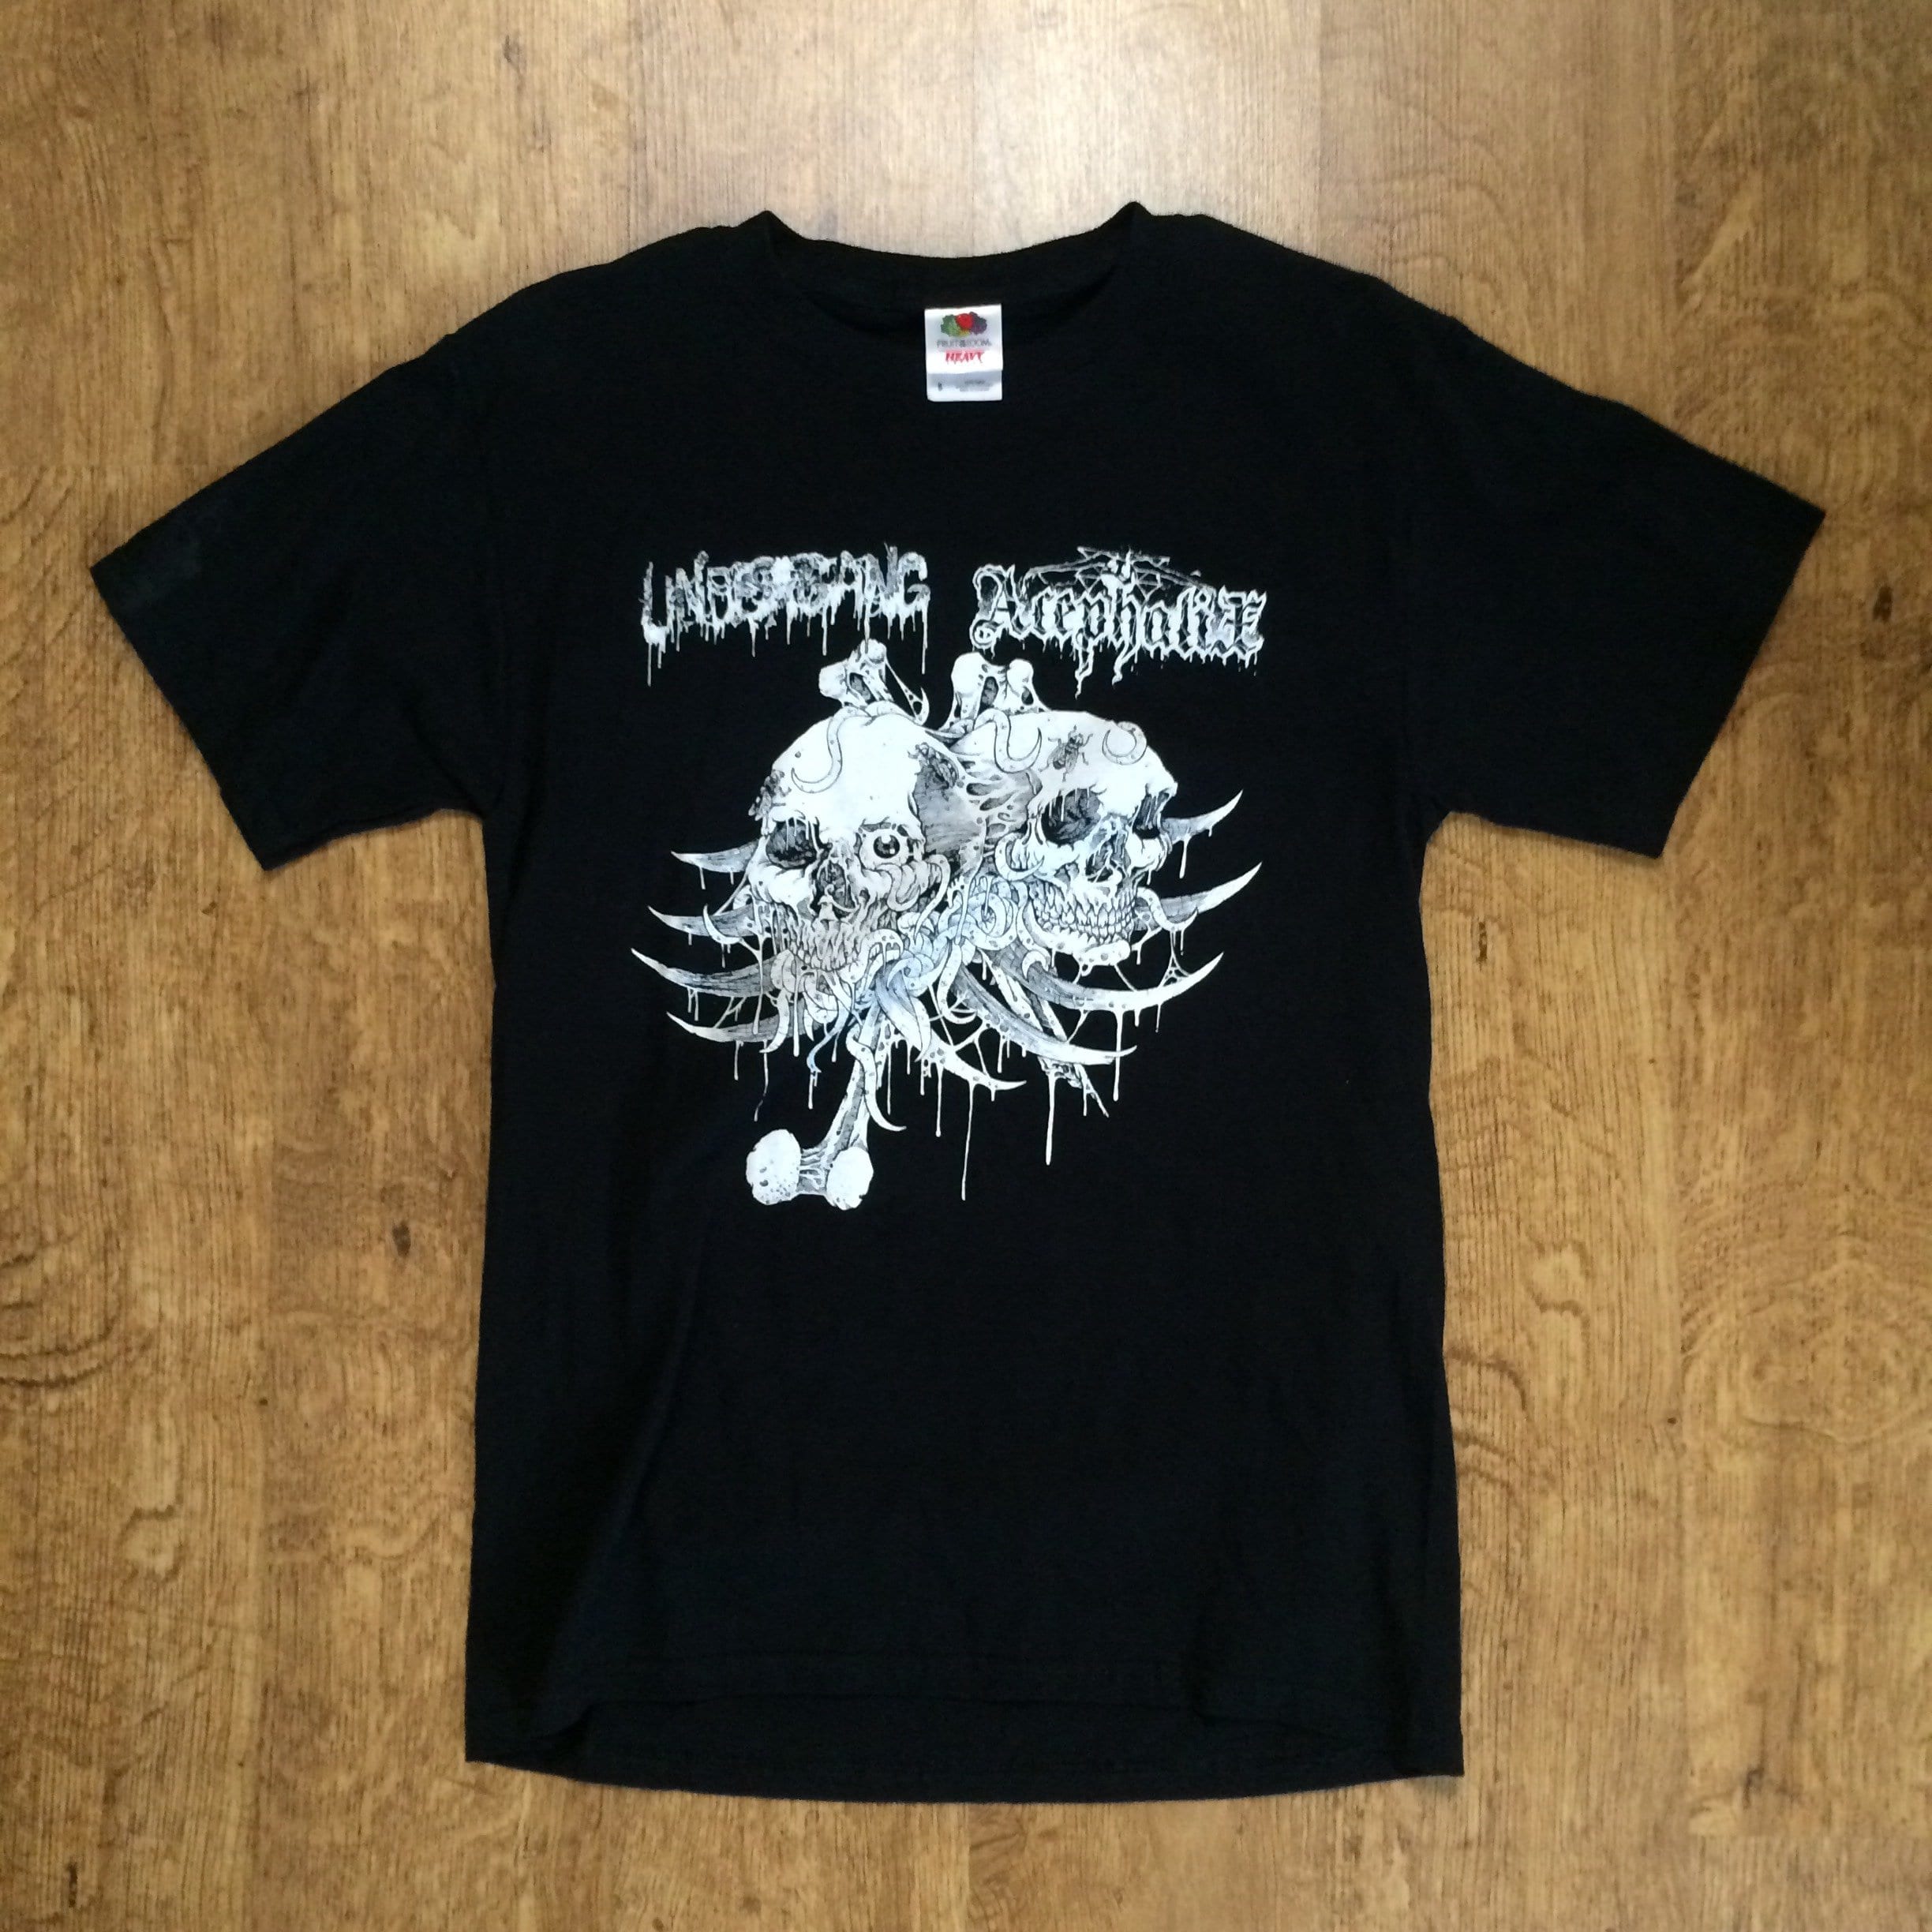 Photo of the Undergang / Acephalix - "Fuckin' Death in the West - 2011 US West Coast tour" T-shirt (Black)